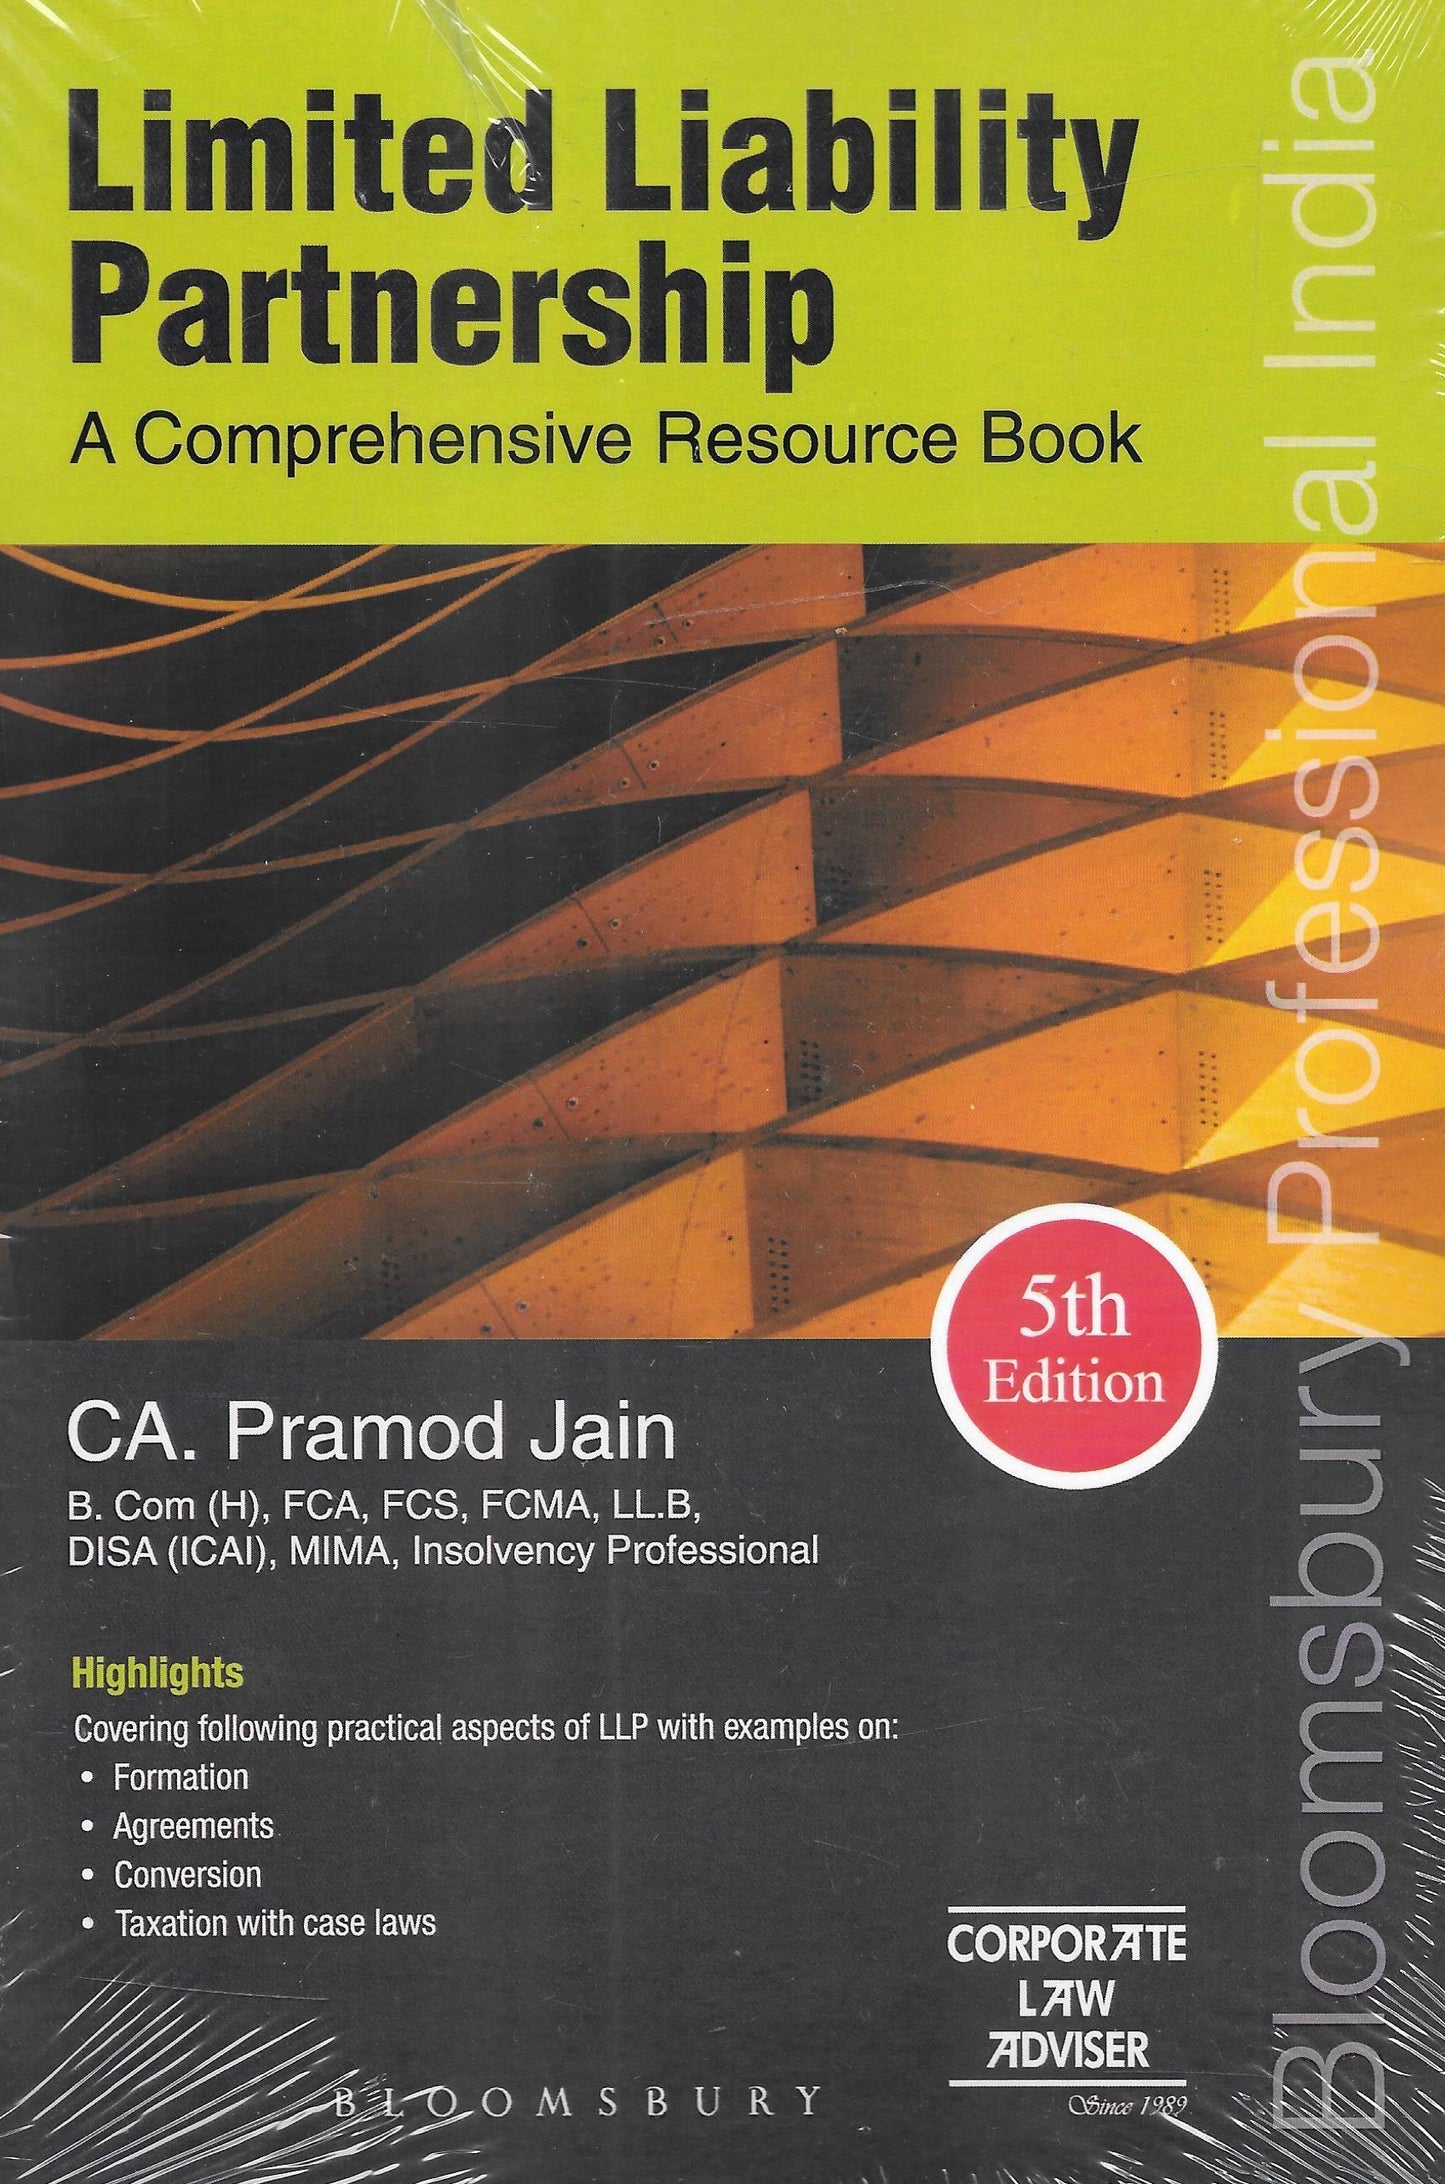 Limited Liability Partnership A Comprehensive Resource Book - M&J Services